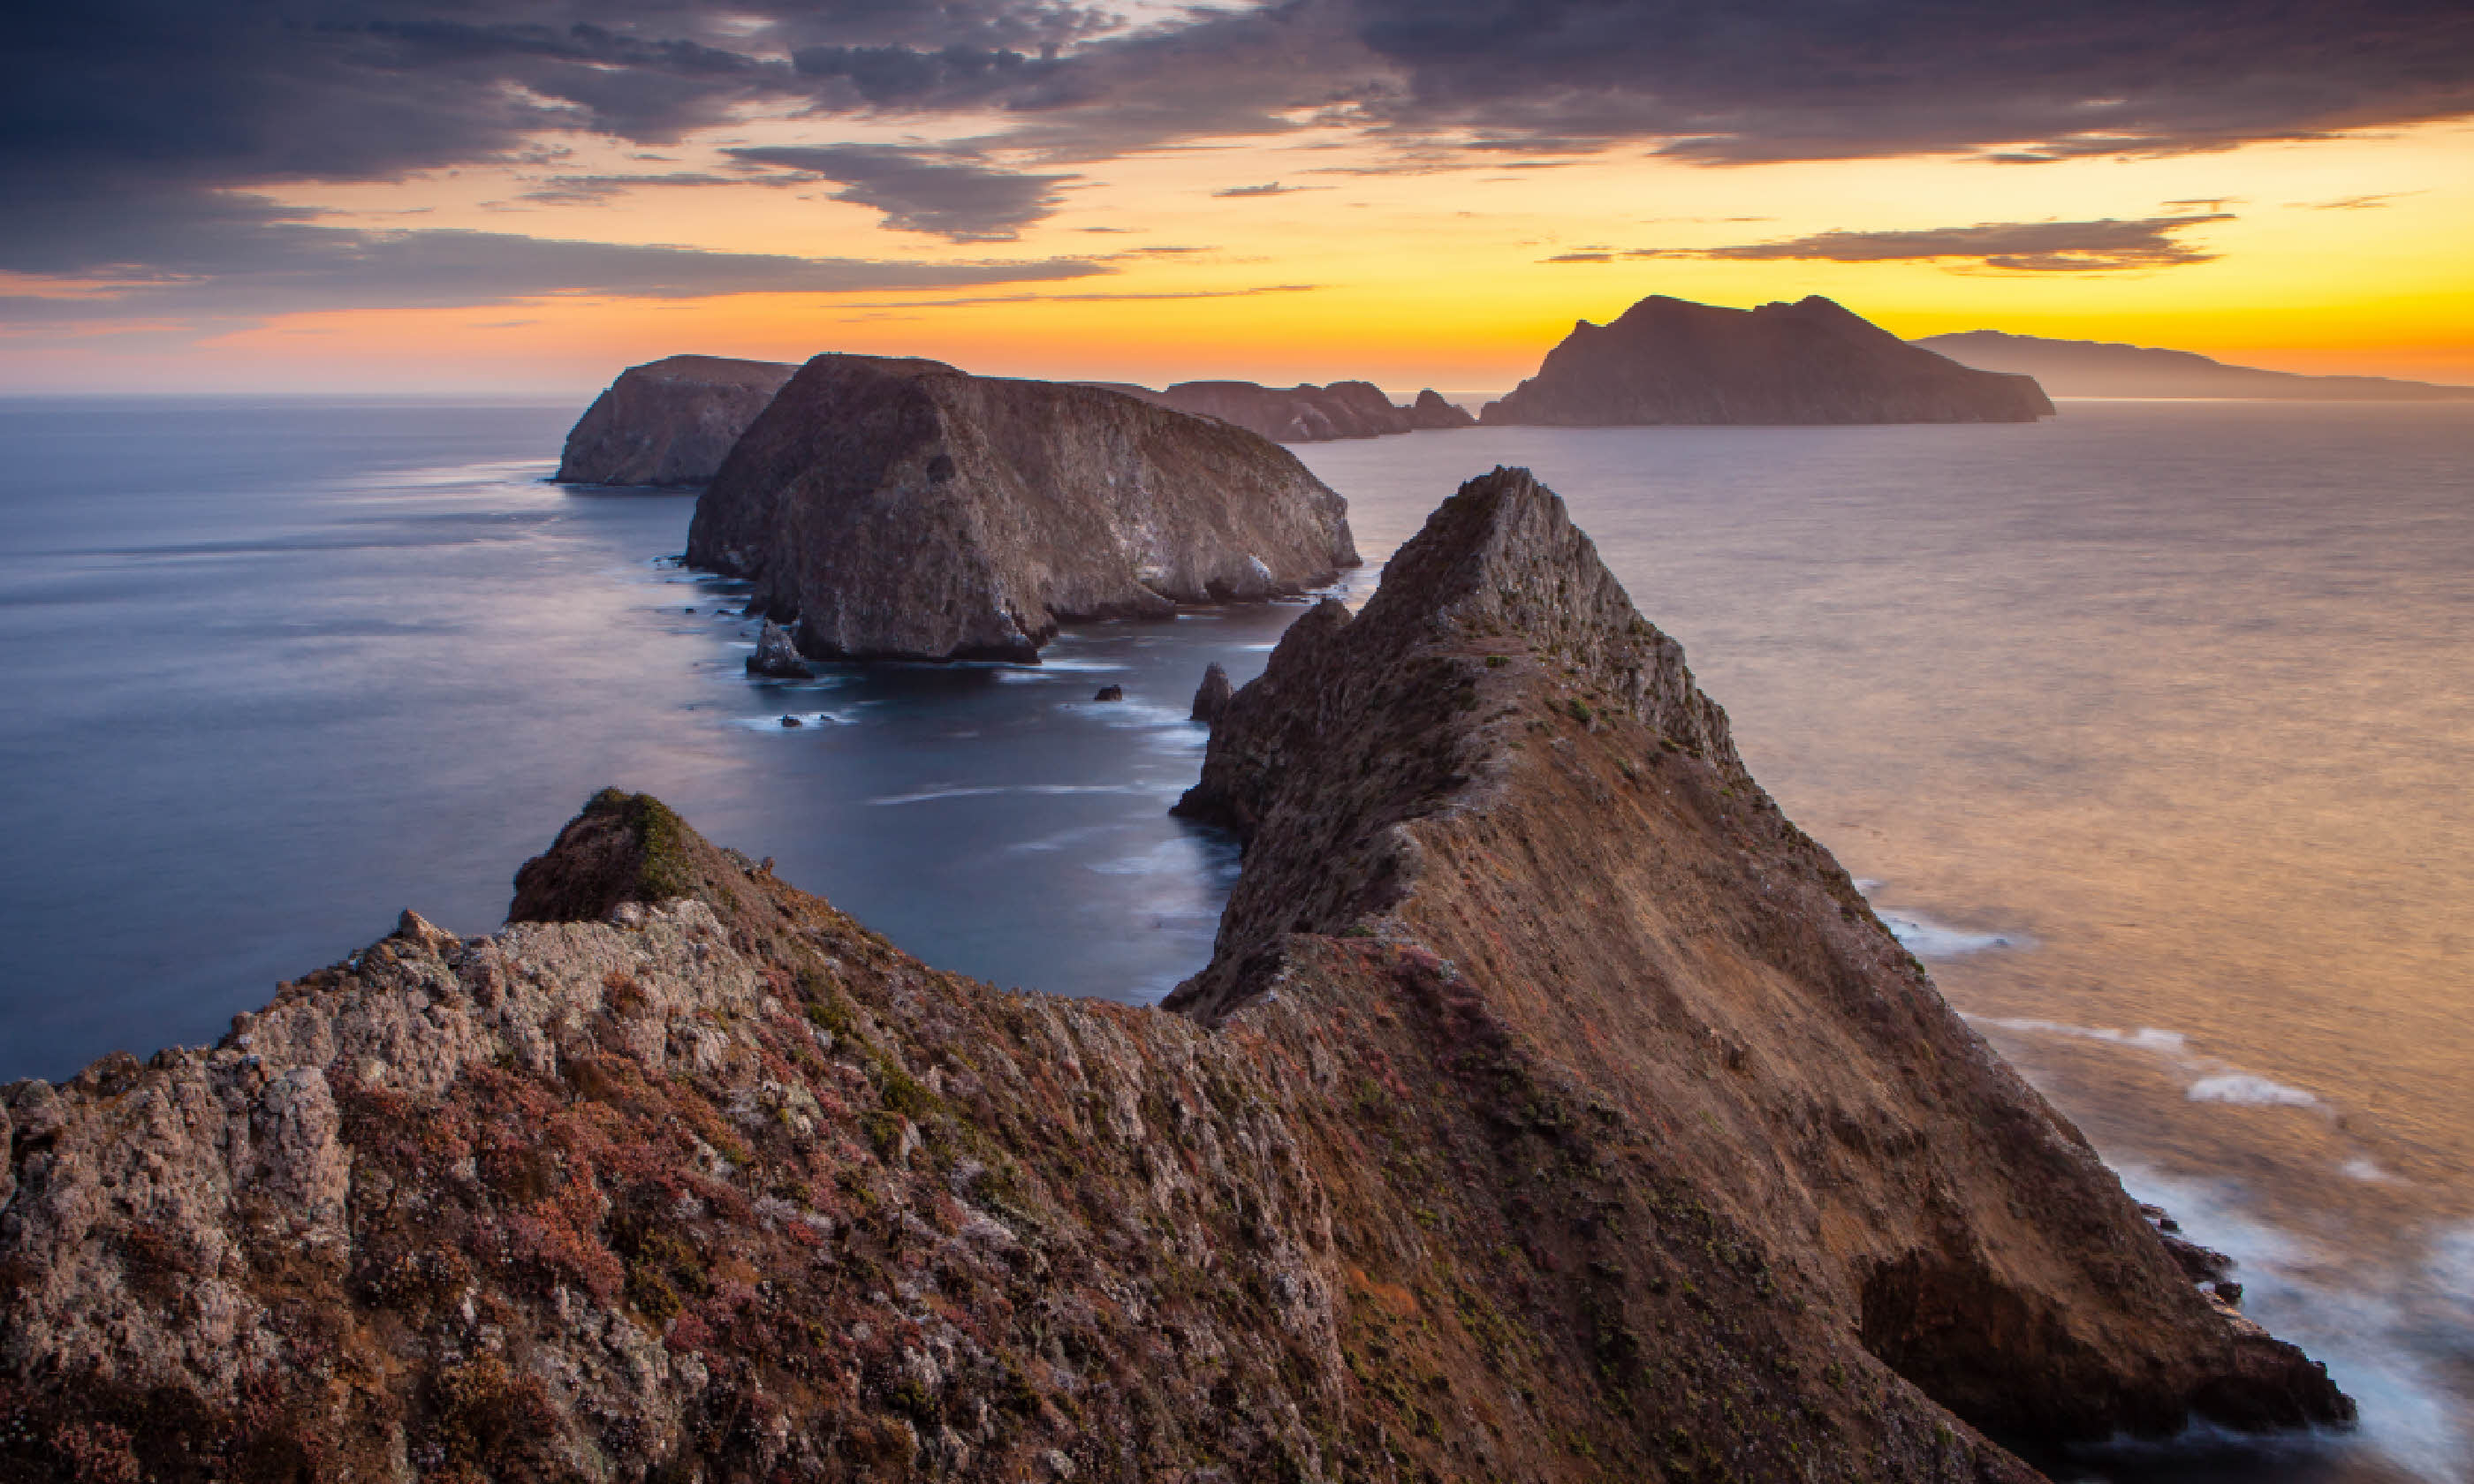 Inspiration Point on Anacapa Island, Channel Islands (Flickr Creative Commons:Brian Hawkins)